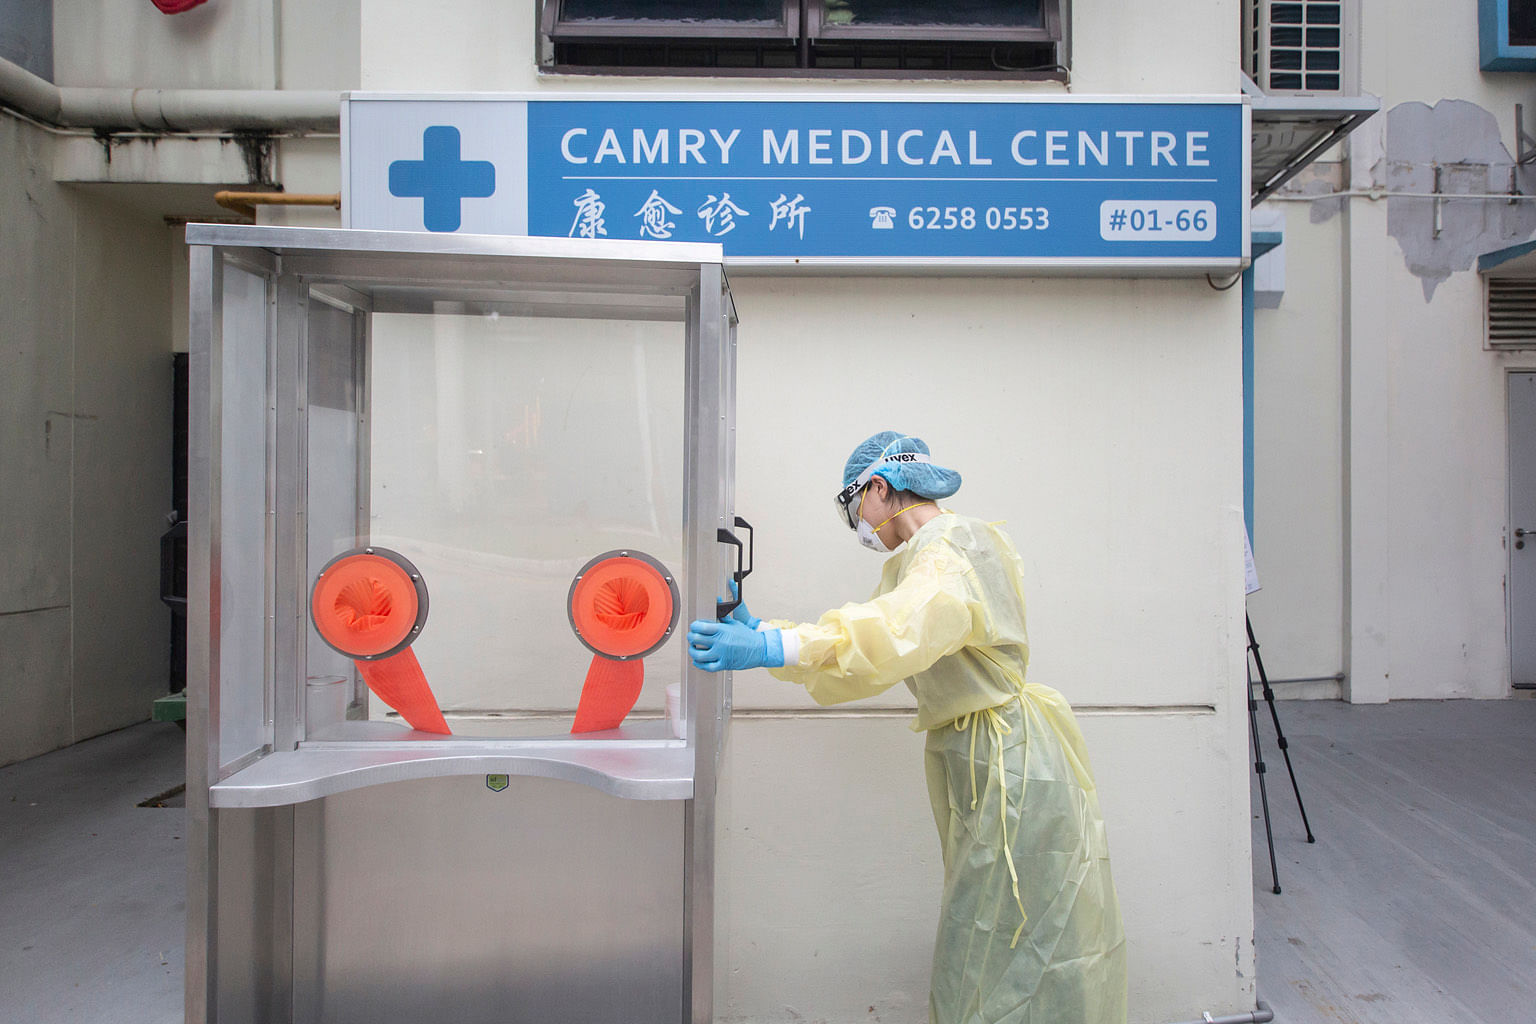 Above: Latex gloves are affixed to a panel separating the swabber from the patient, for doctors to insert their hands to collect patients' swab samples. Left: The swab booths, built using an aluminium frame and polycarbonate panels, are lightweight a